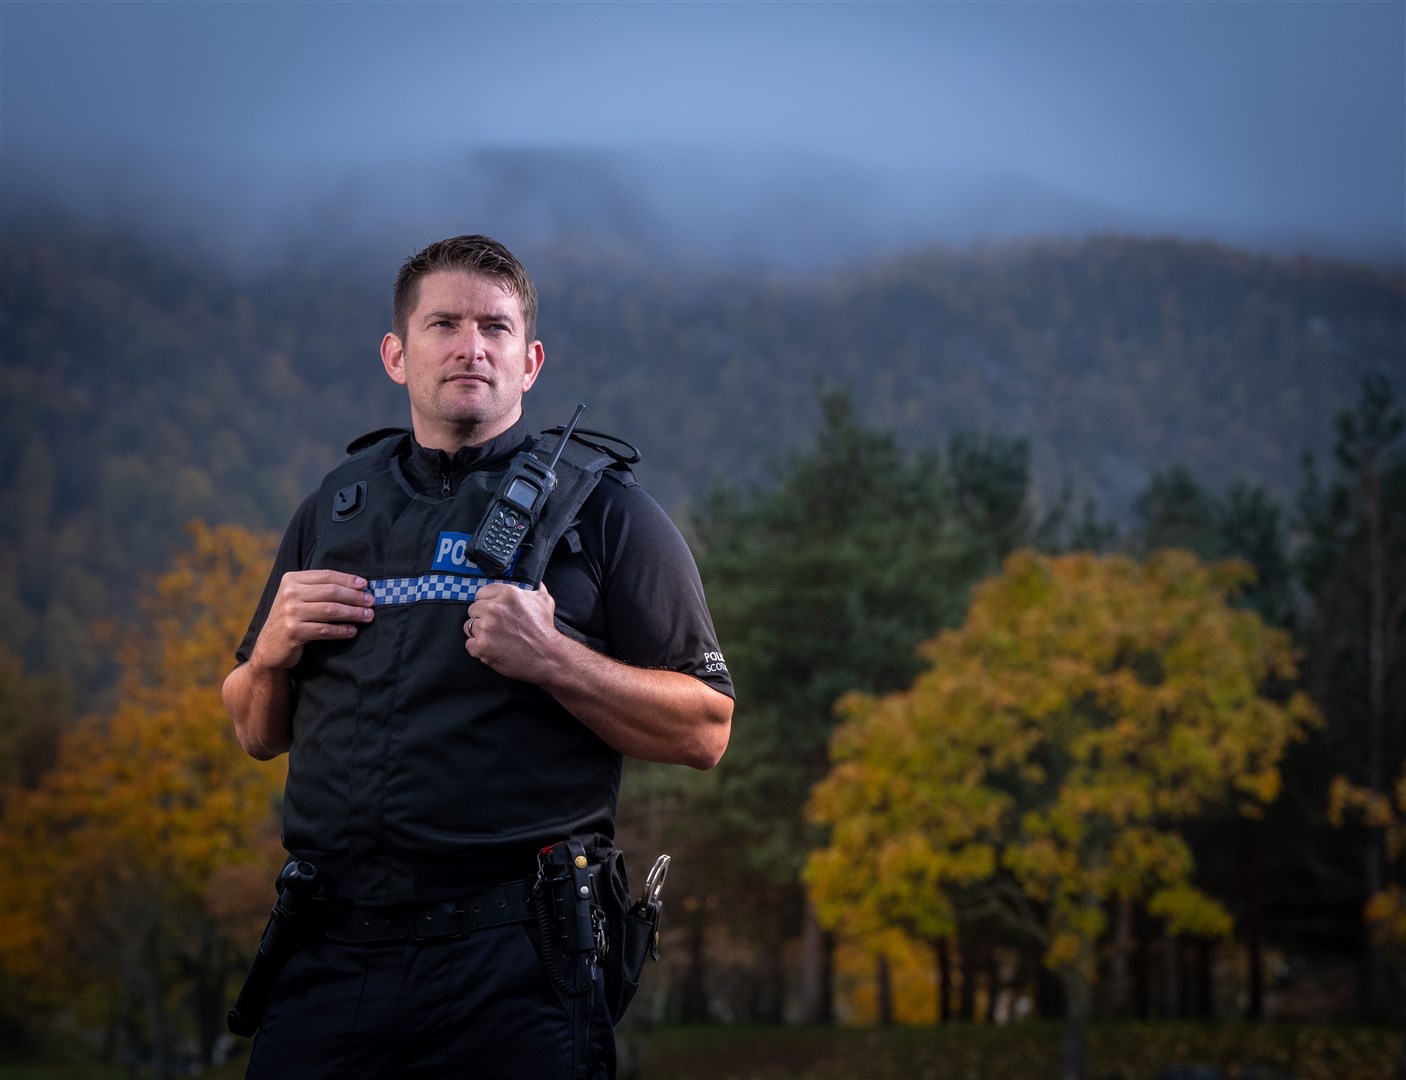 Inverness police officer Paul Phillips has been nominated for a bravery award. Picture: Sandy Young/scottishphotographer.com